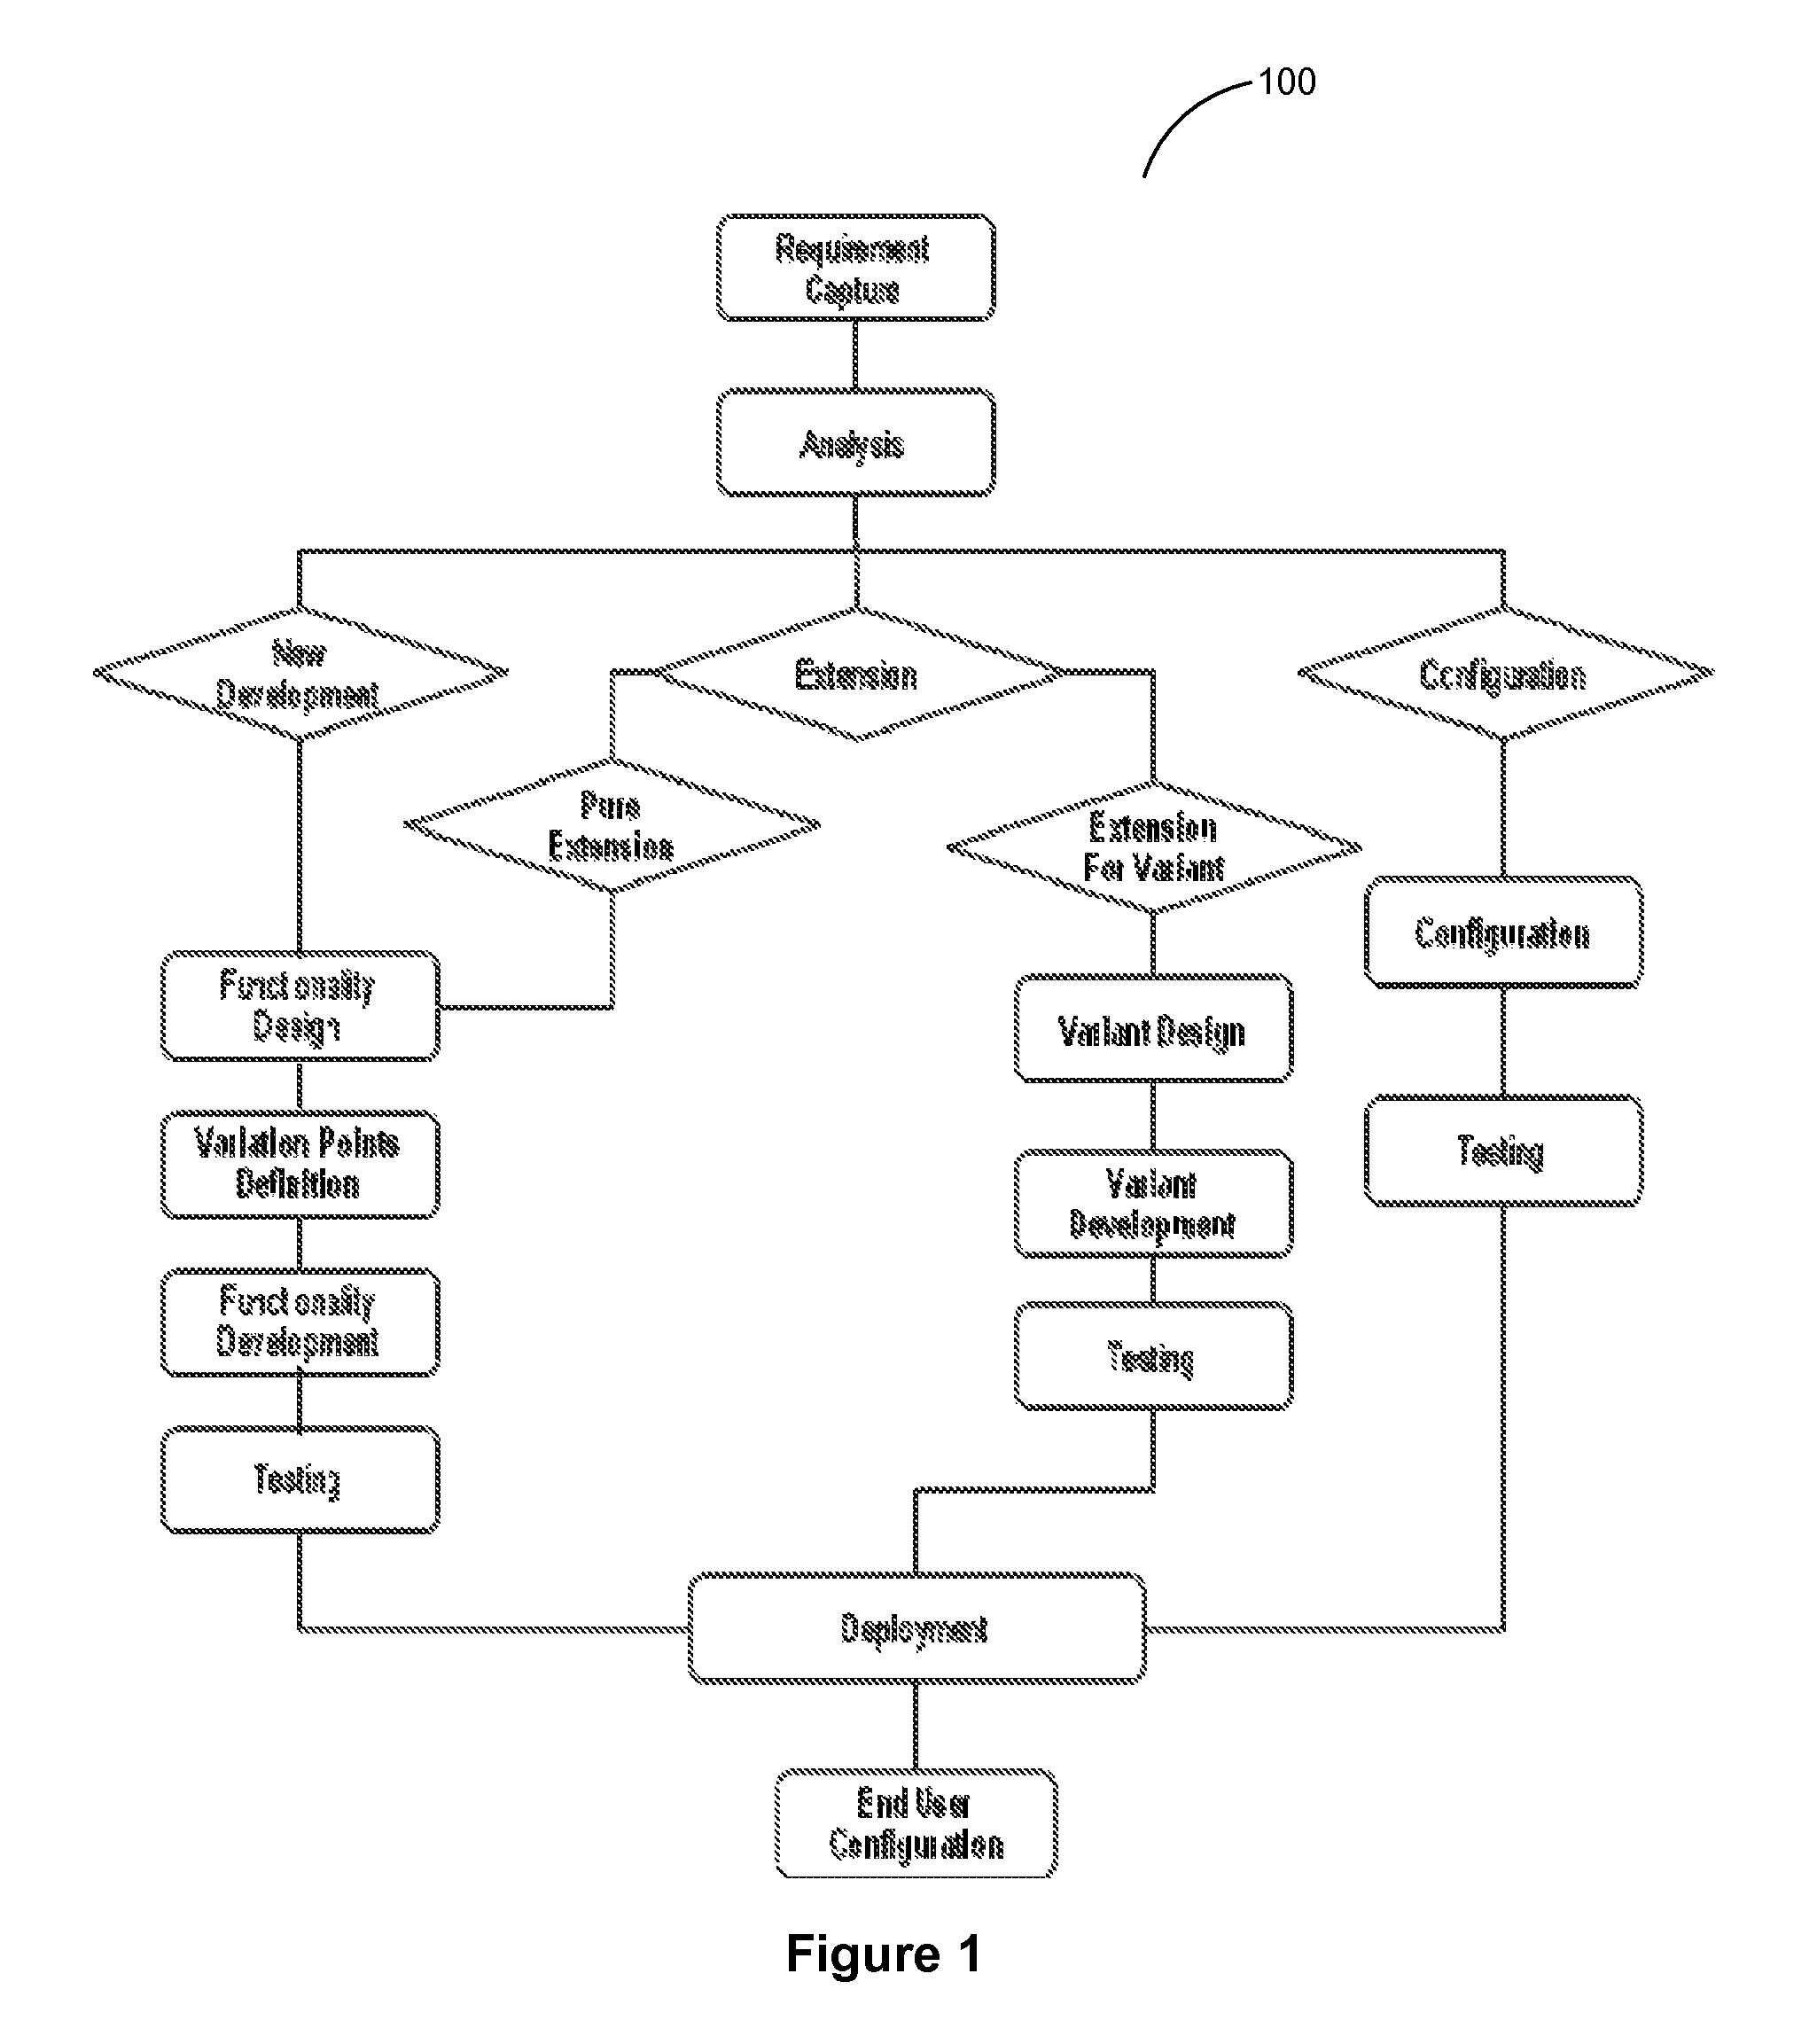 Computationally efficient system for developing configurable, extensible business application product lines using model-driven techniques